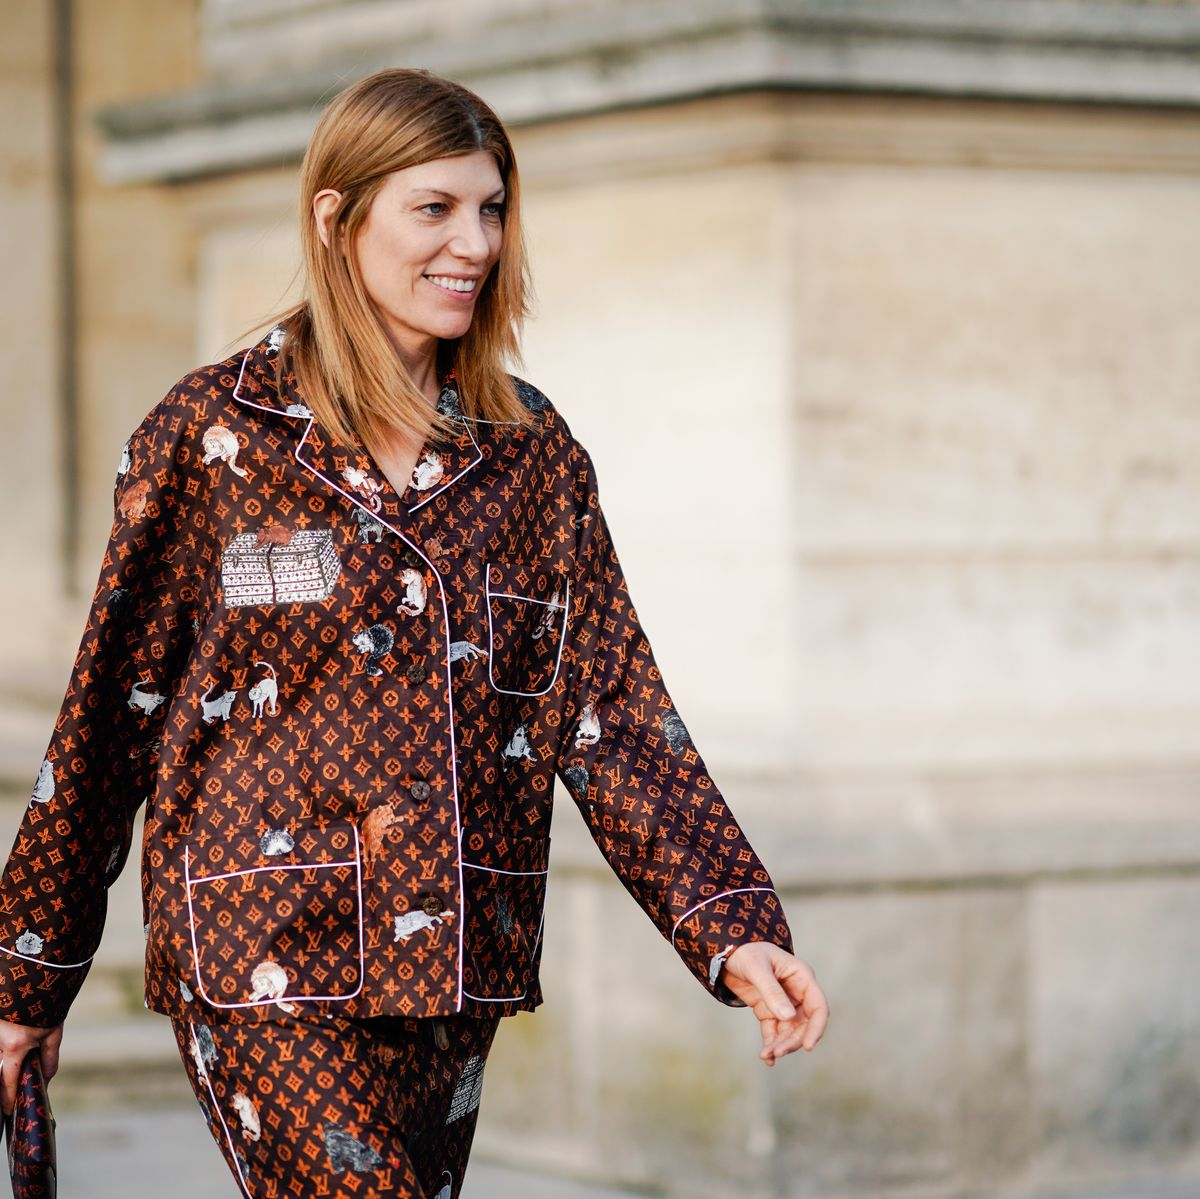 A guest wears a Vuitton brown monogram pyjama outfit, outside